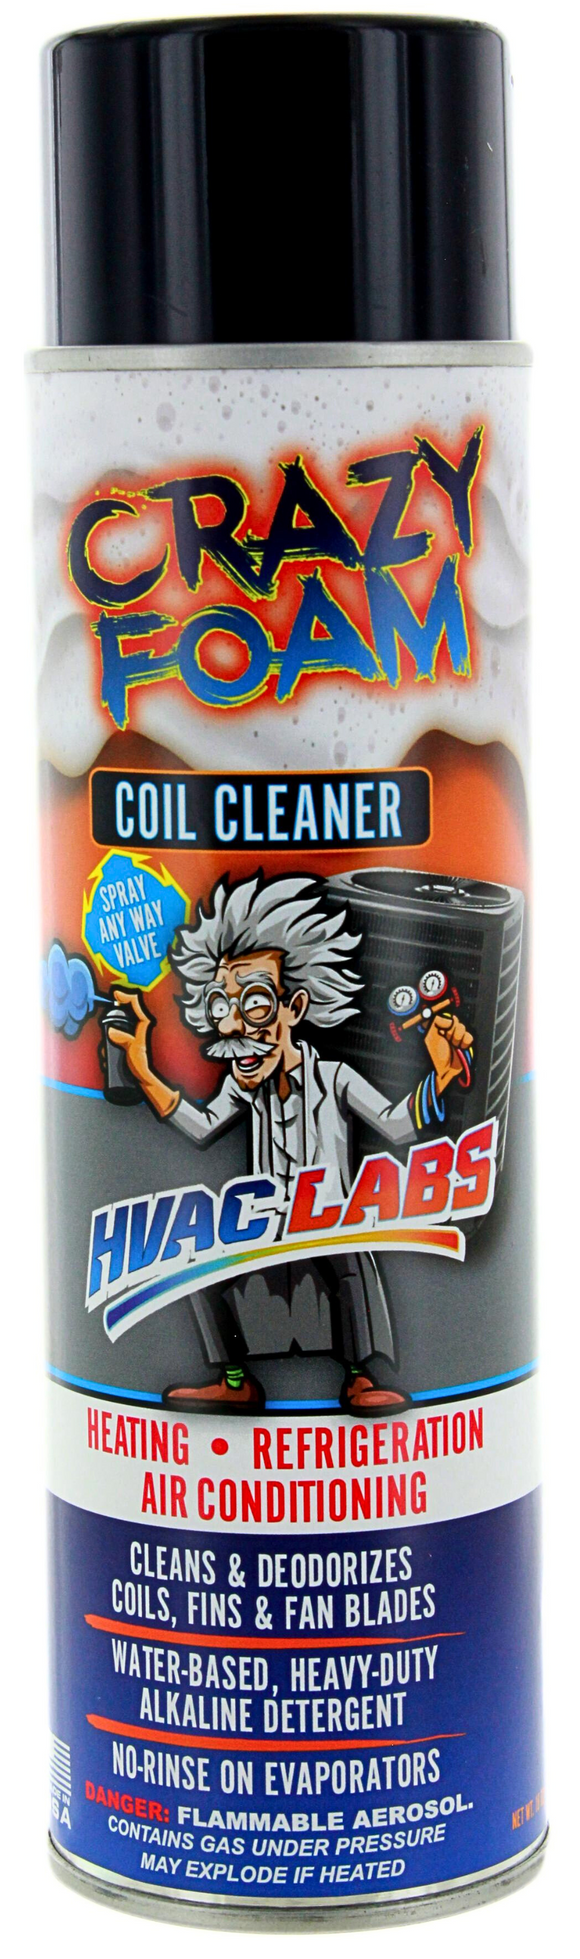 Mad Foam AC Coil Cleaner Foaming for AC Heating & Refrigeration